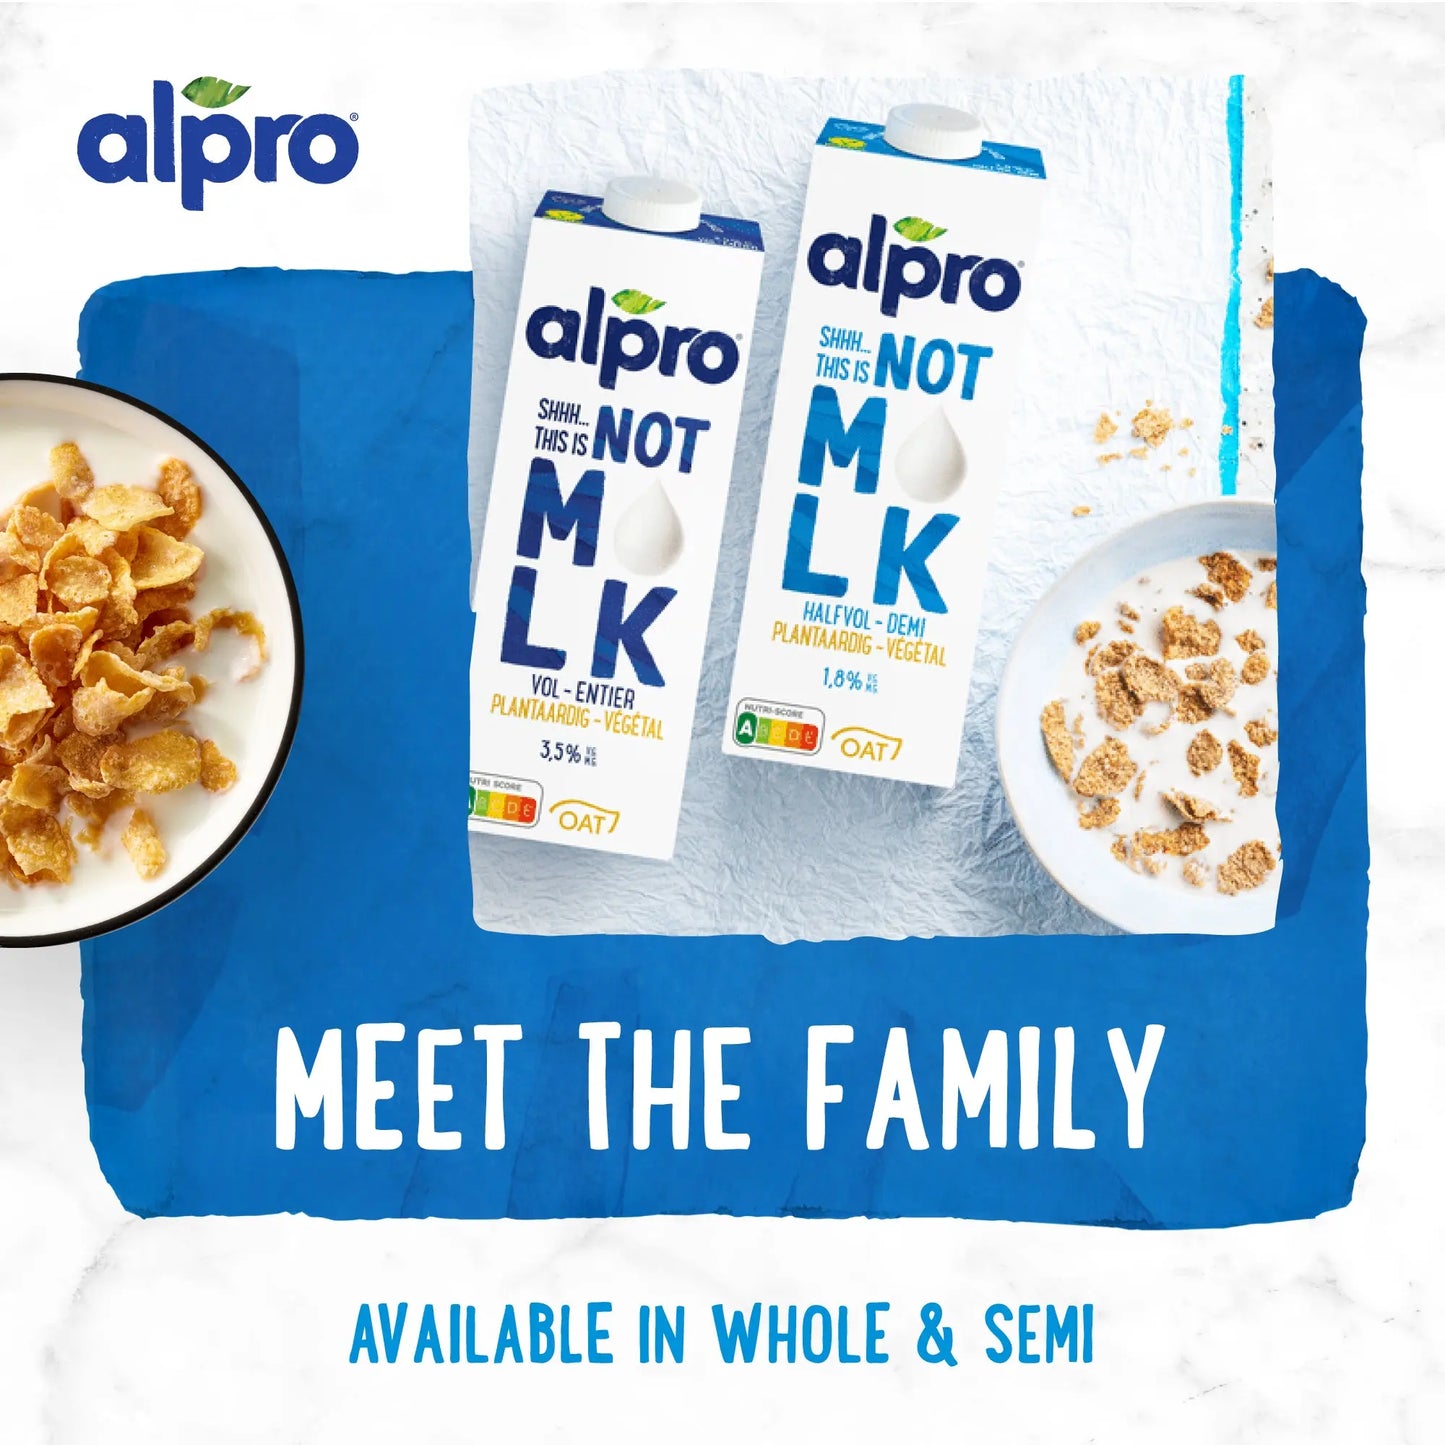 Alpro Shhh This Is Not Milk Semi 1L, 100% Plant Based And Gluten & Dairy Free, Suitable For Vegans, Naturally Free From Lactose, Rich In Nutrients Alpro